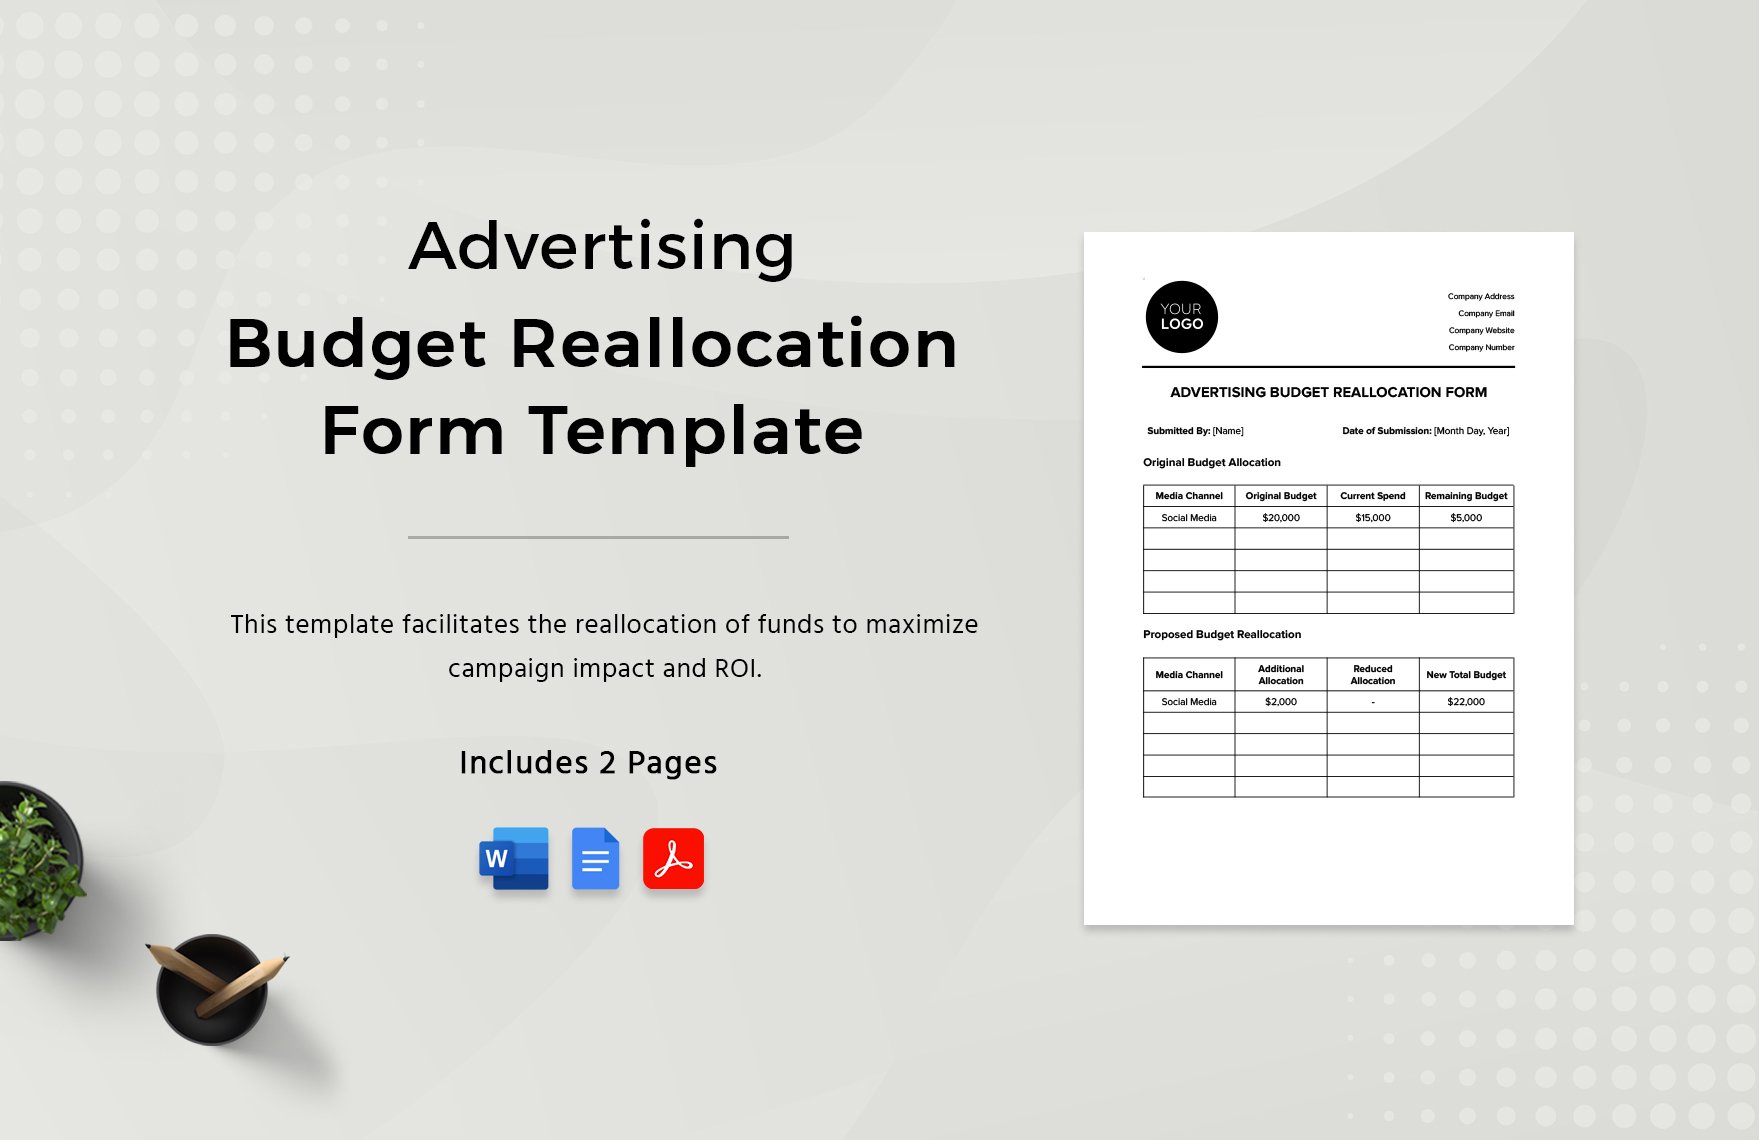 Advertising Budget Reallocation Form Template in Word, Google Docs, PDF